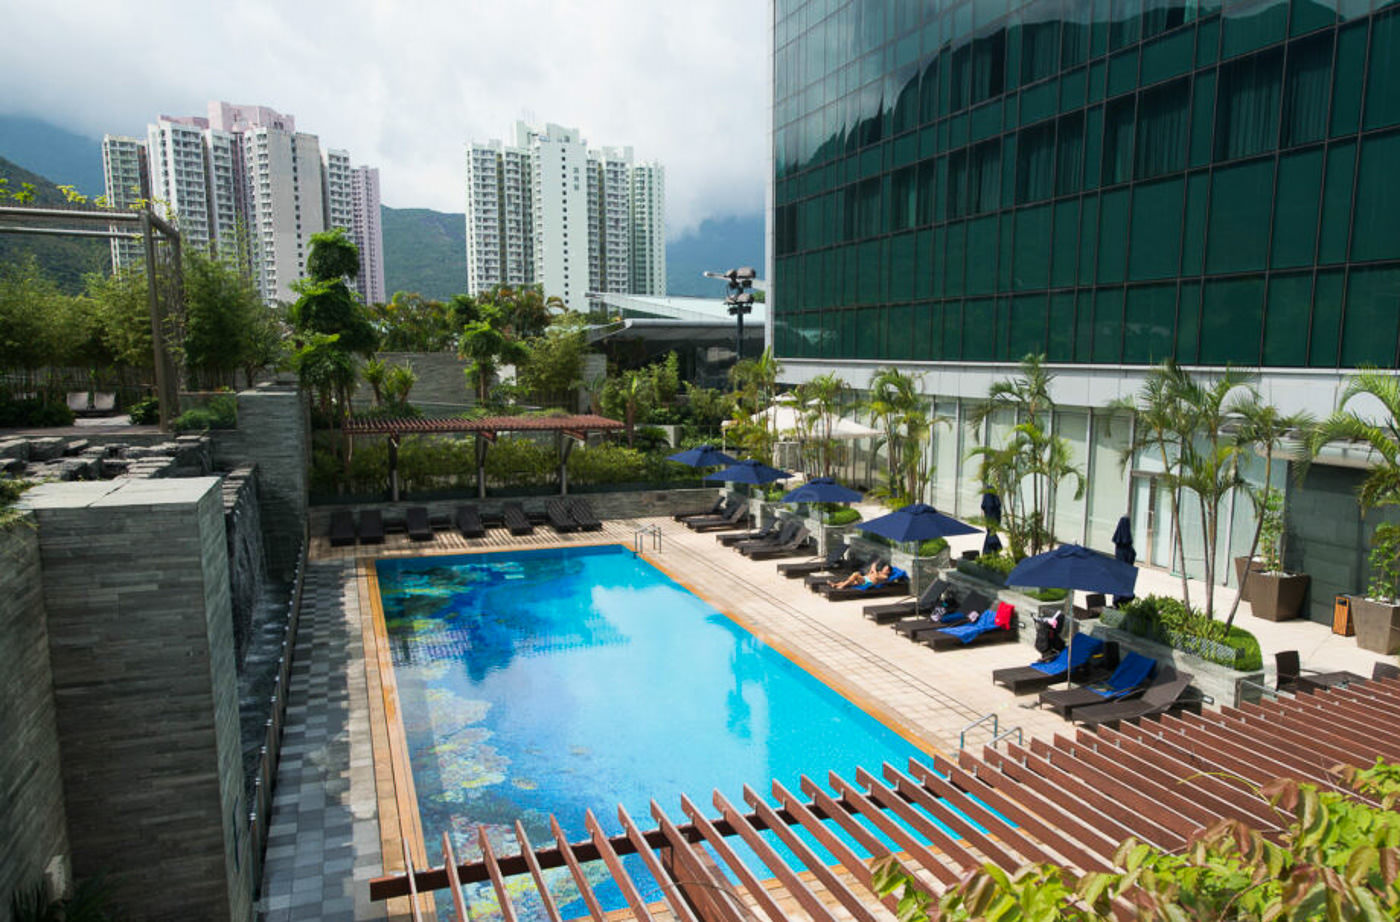 a swimming pool with lounge chairs and umbrellas.